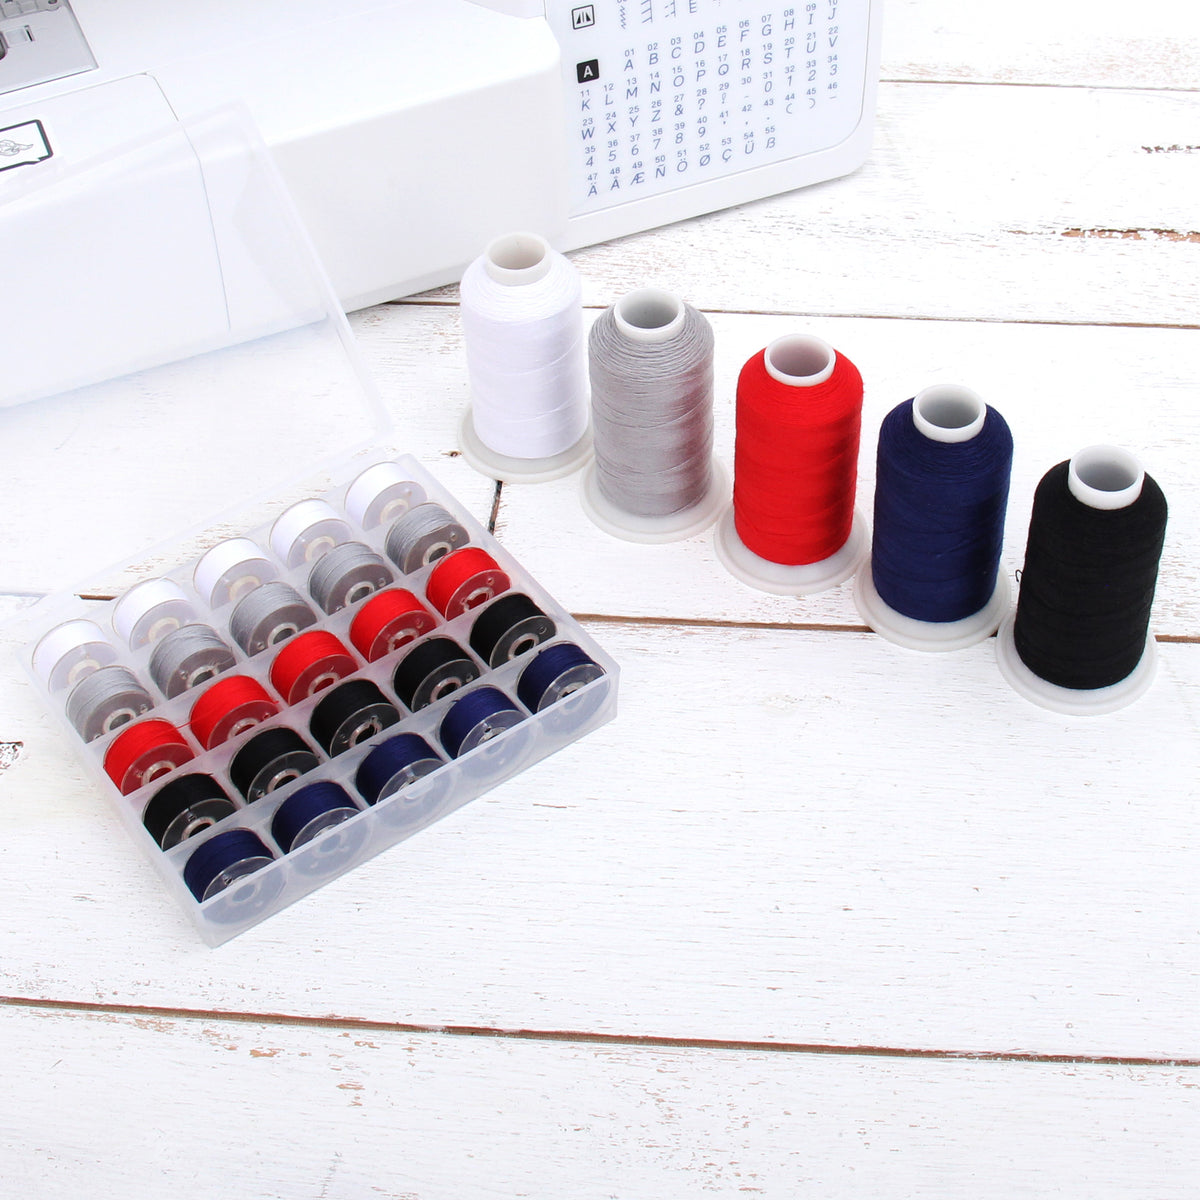 Polyester All-Purpose Sewing Thread 11 Cone Neutral Shades Set